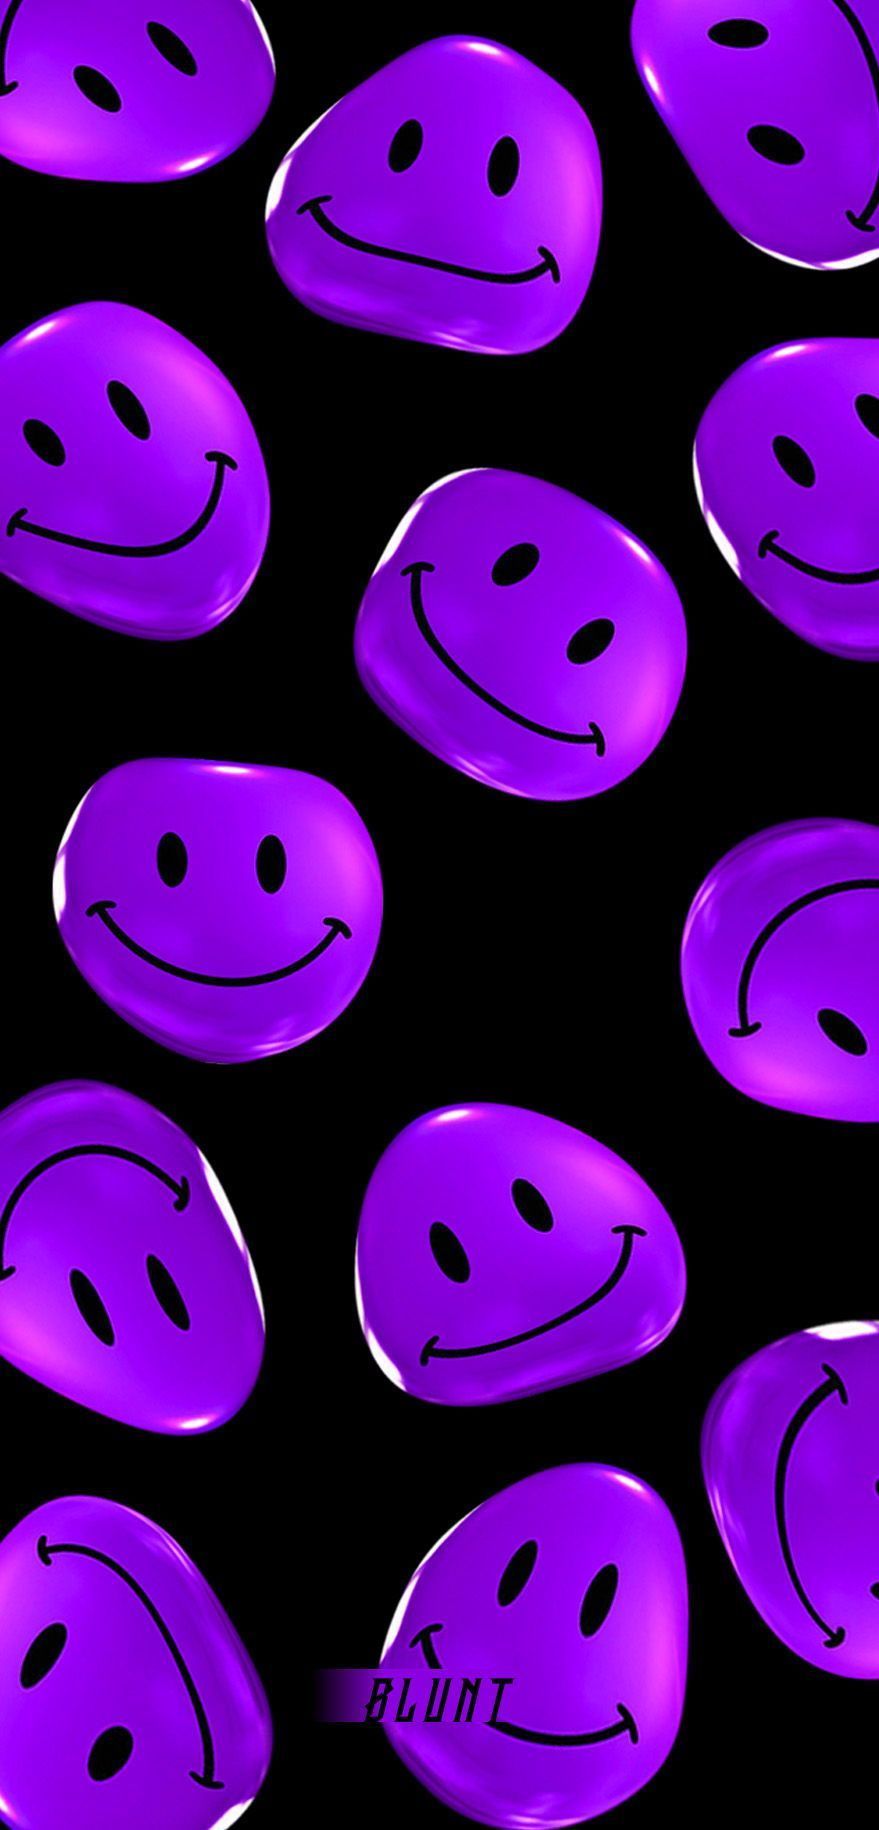 Purple smiley wallpaper for phone and desktop. - Smiley